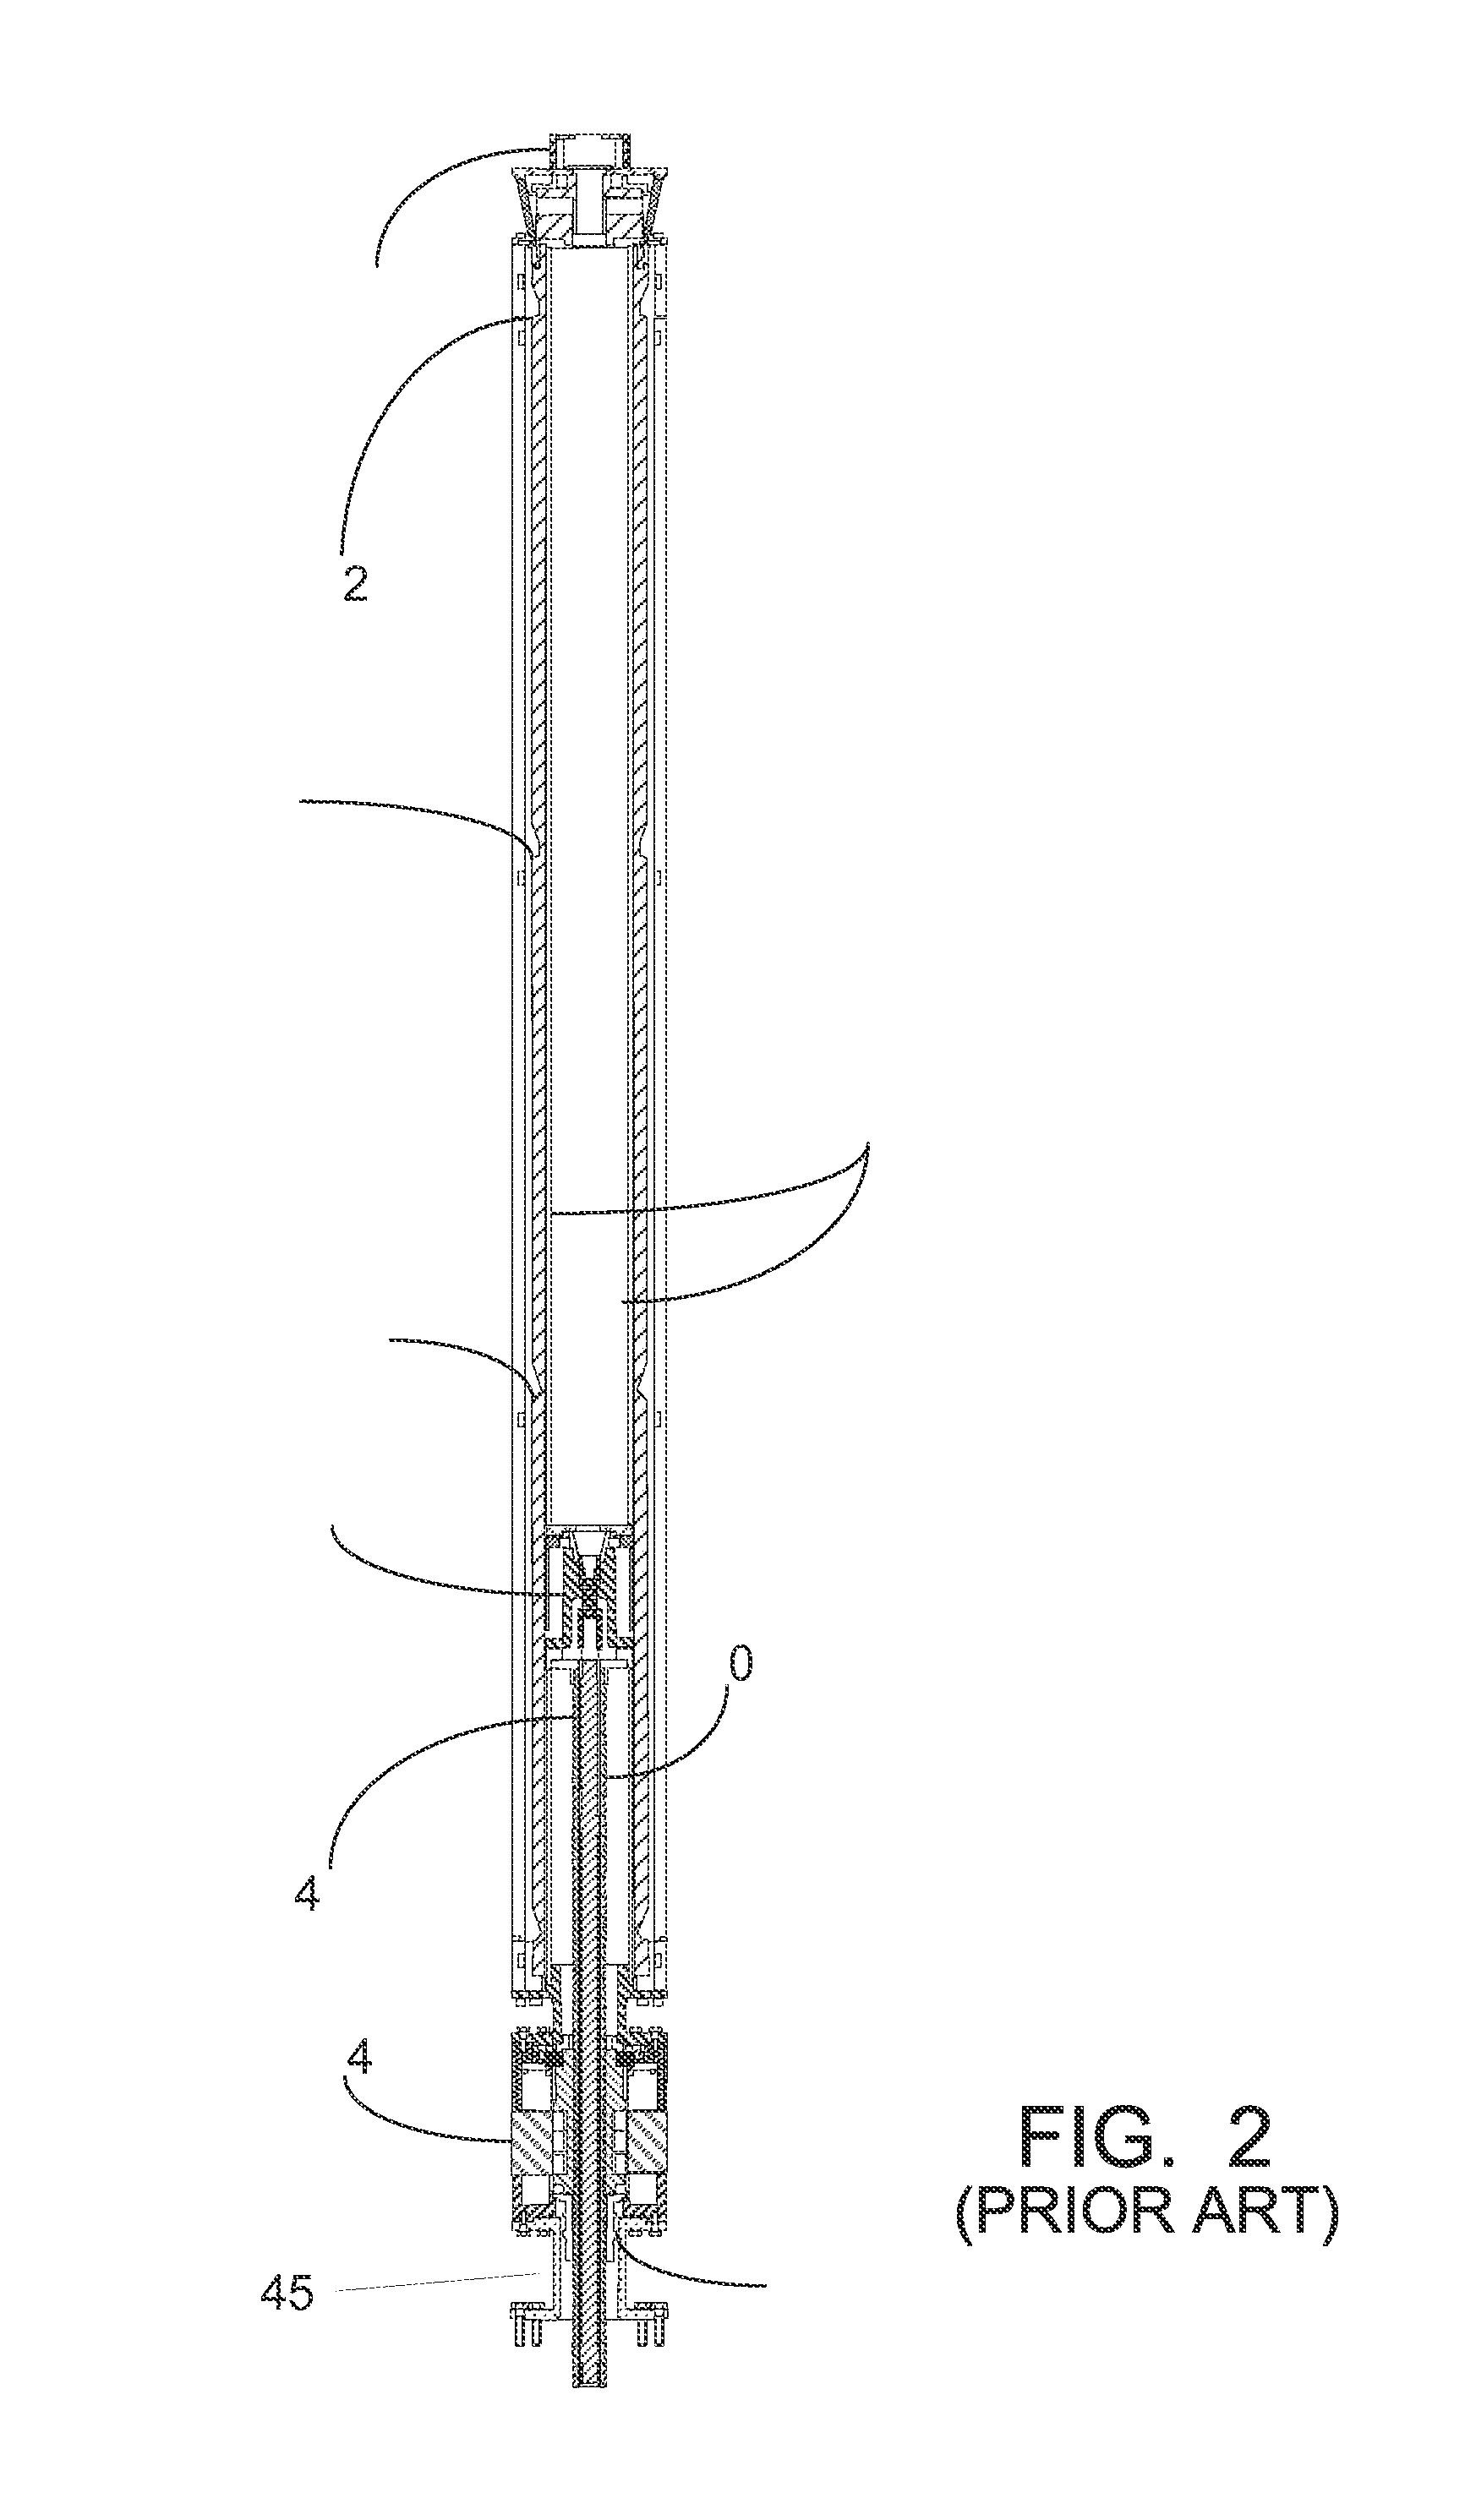 Crdm with separate scram latch engagment and locking